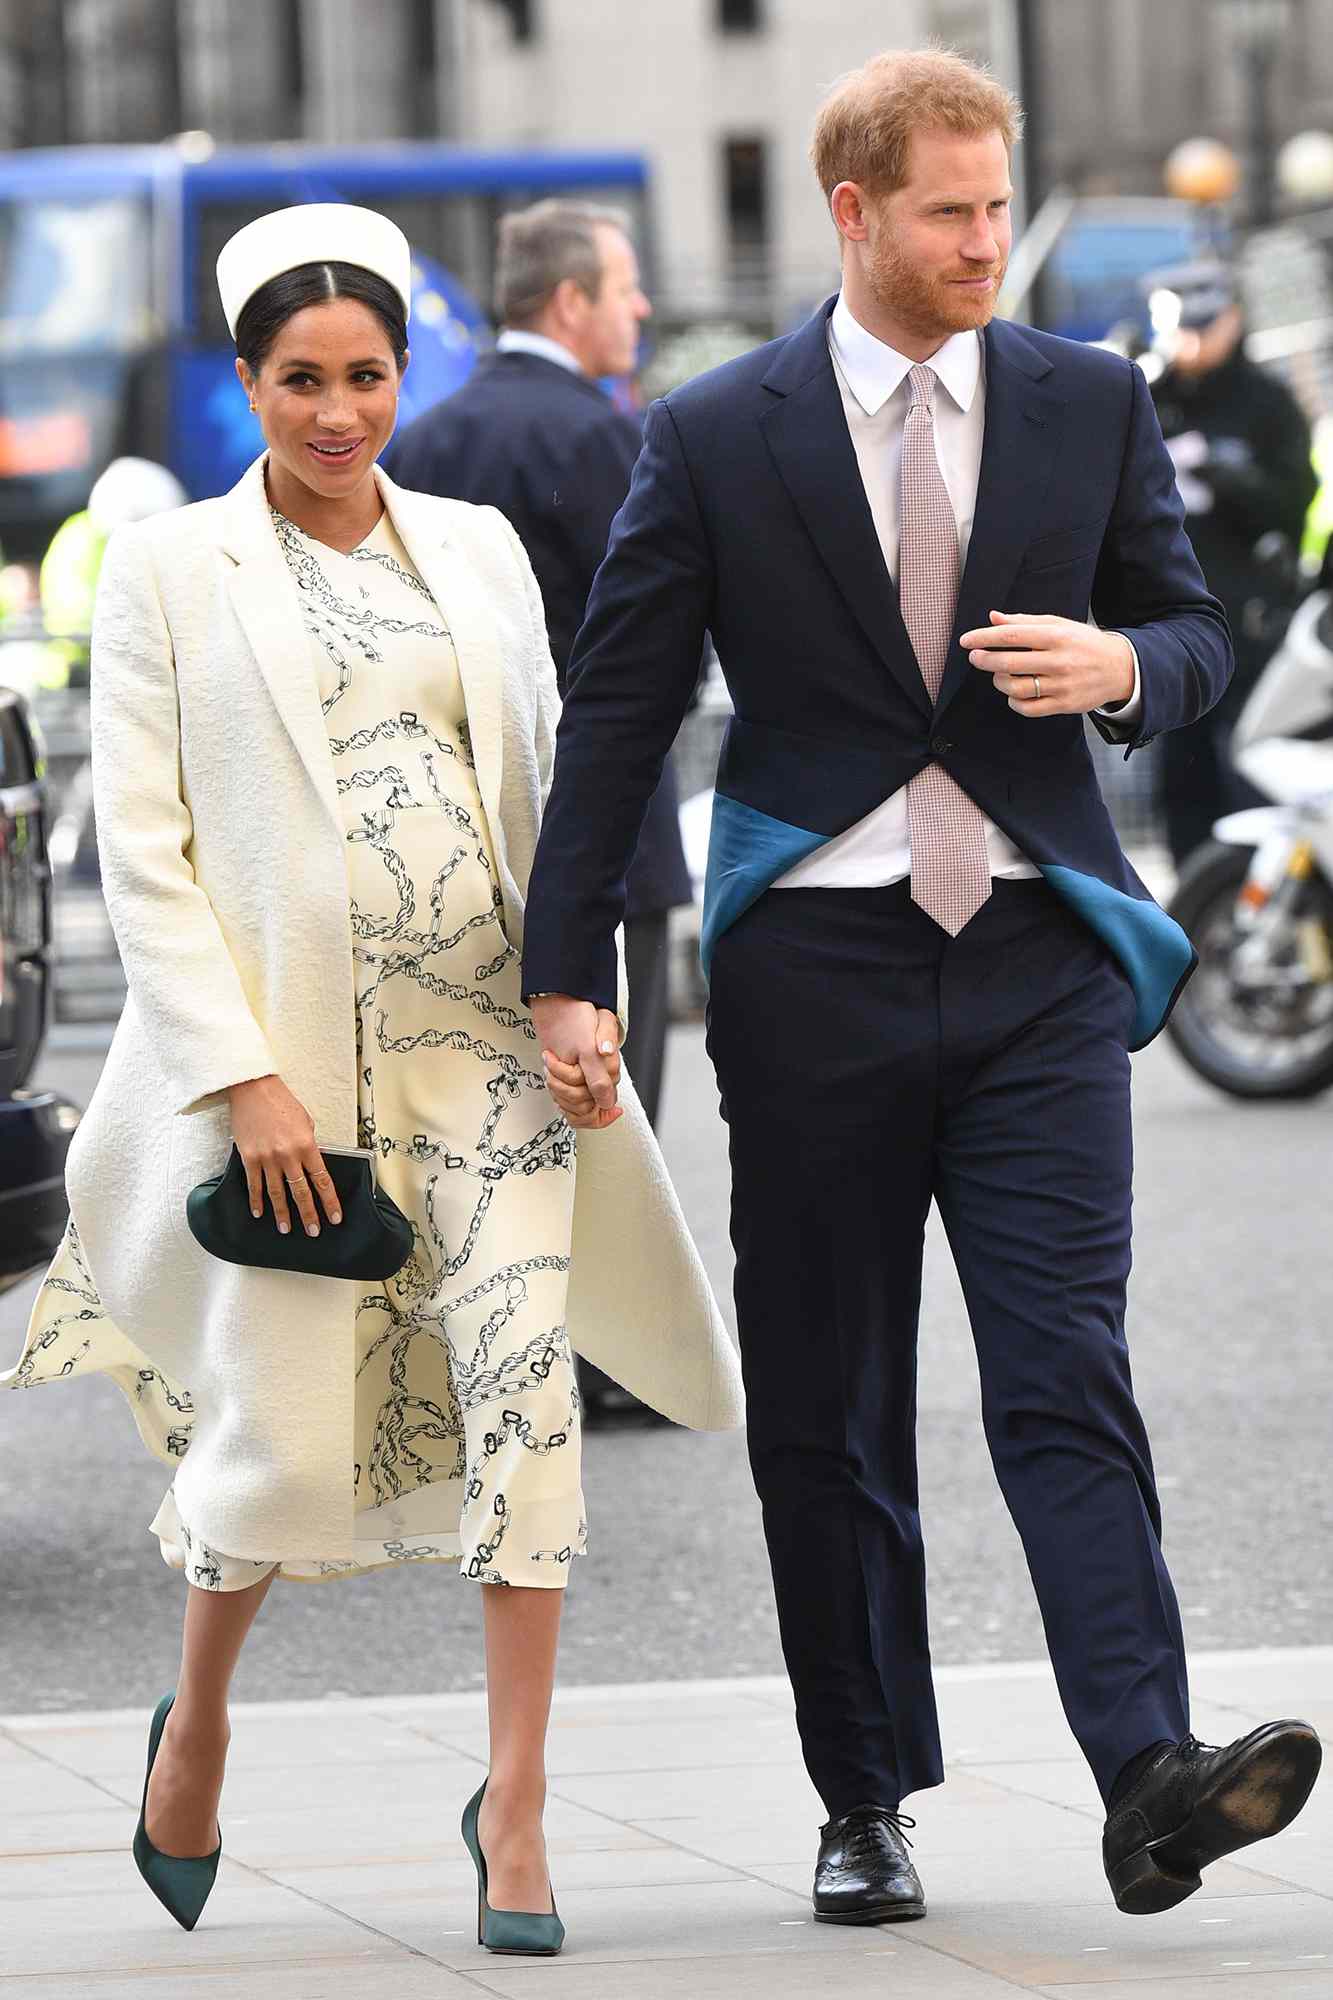 Pregnant Meghan Markle and Prince Harry Walking